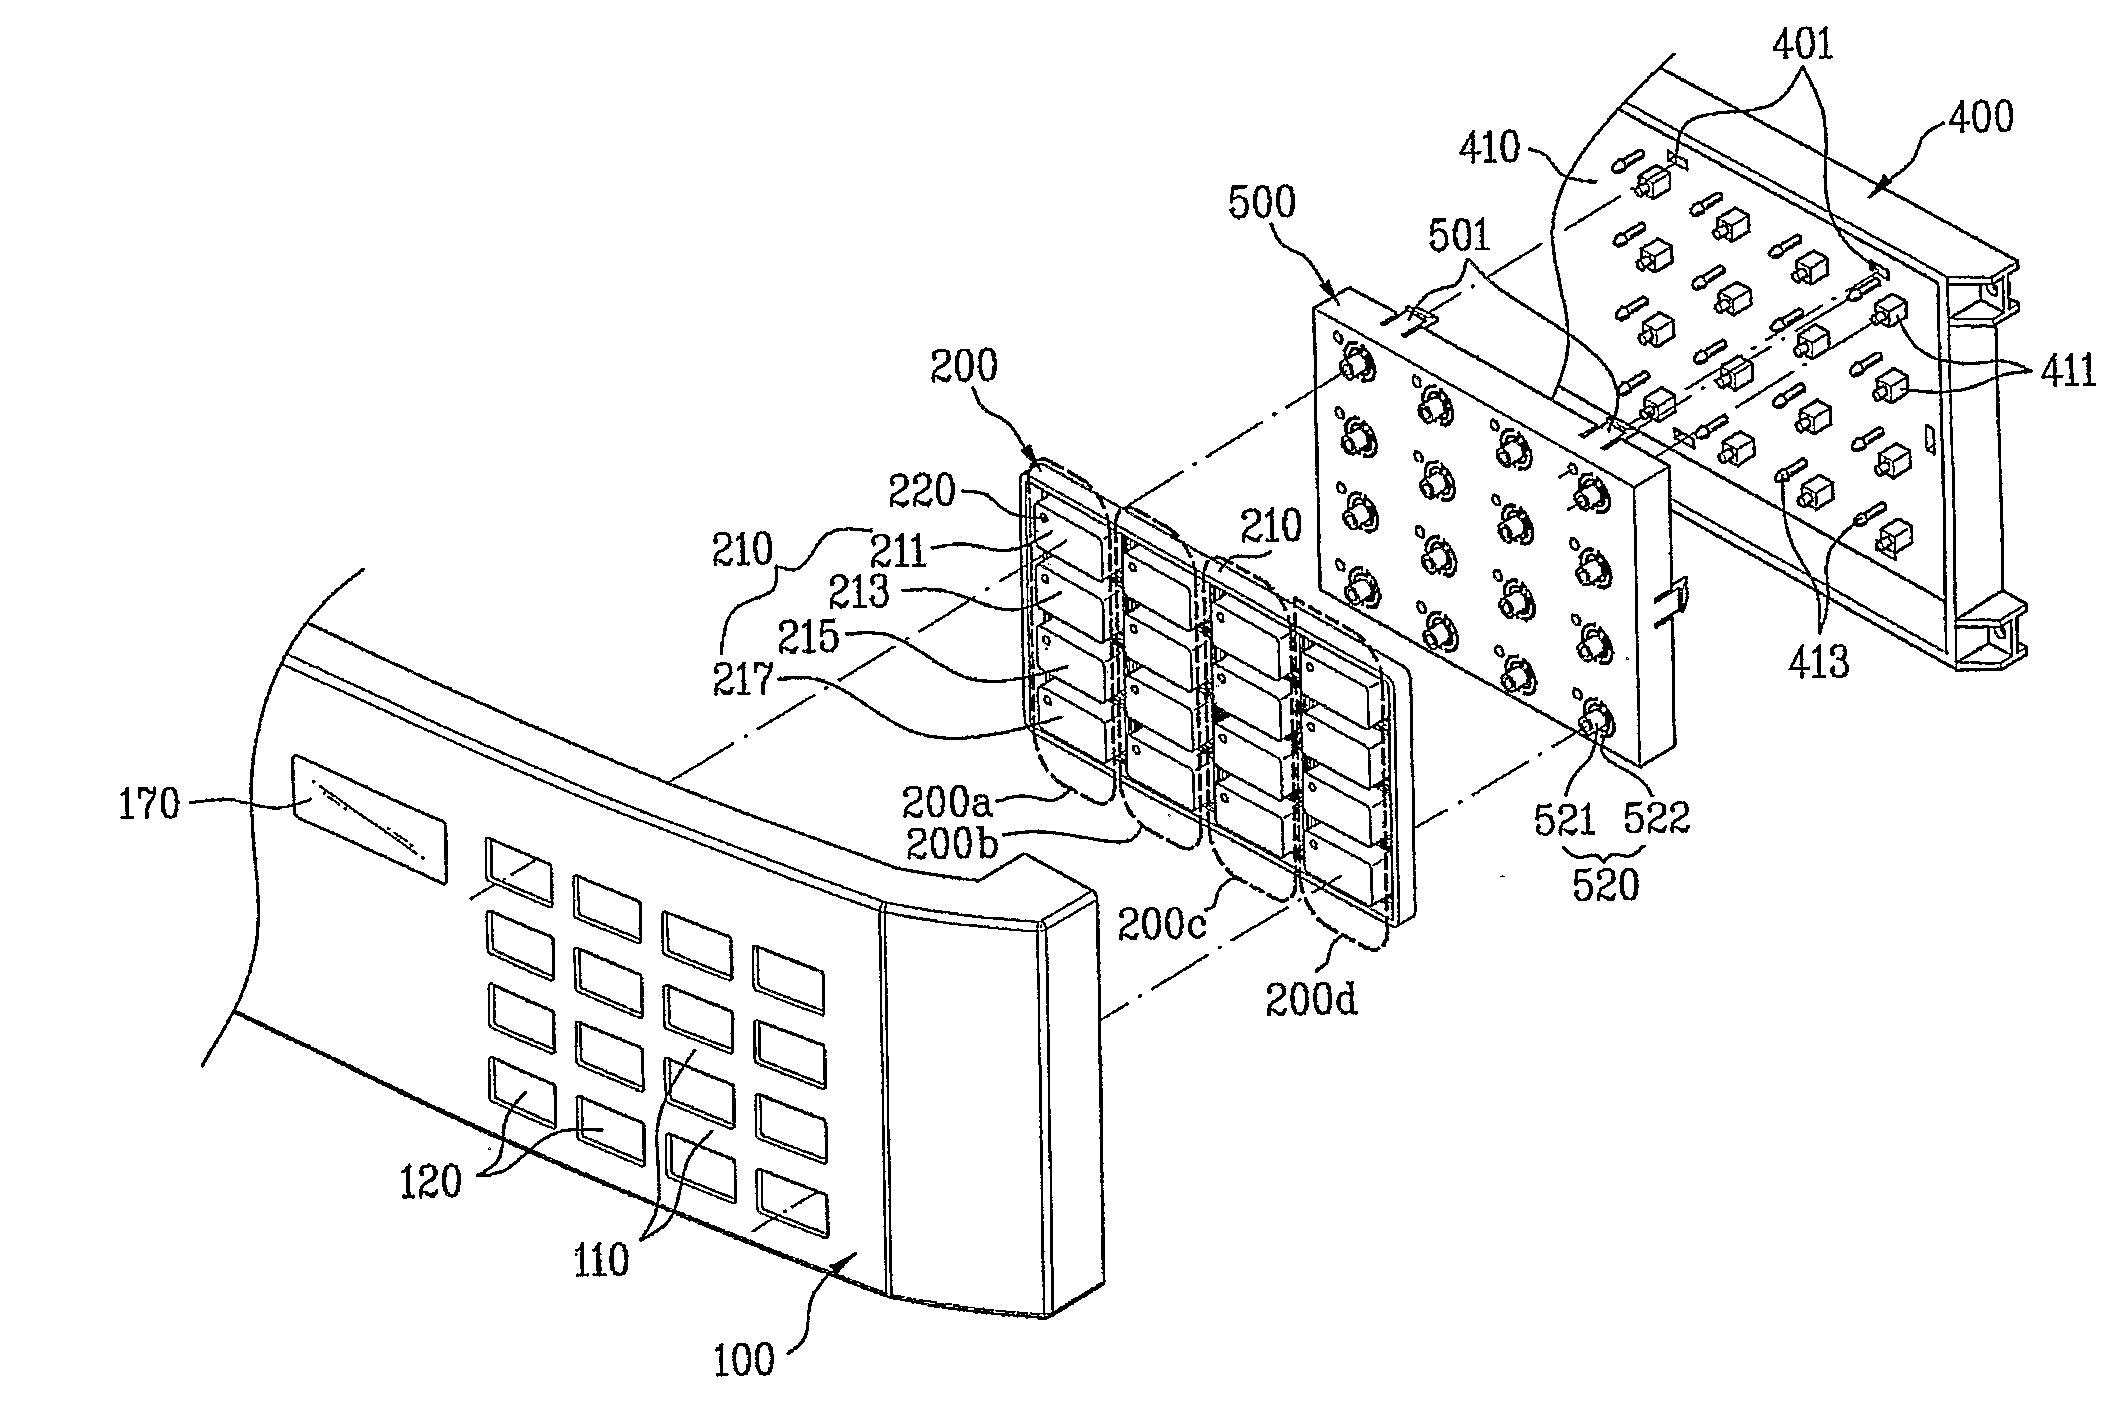 Control panel assembly for laundry device